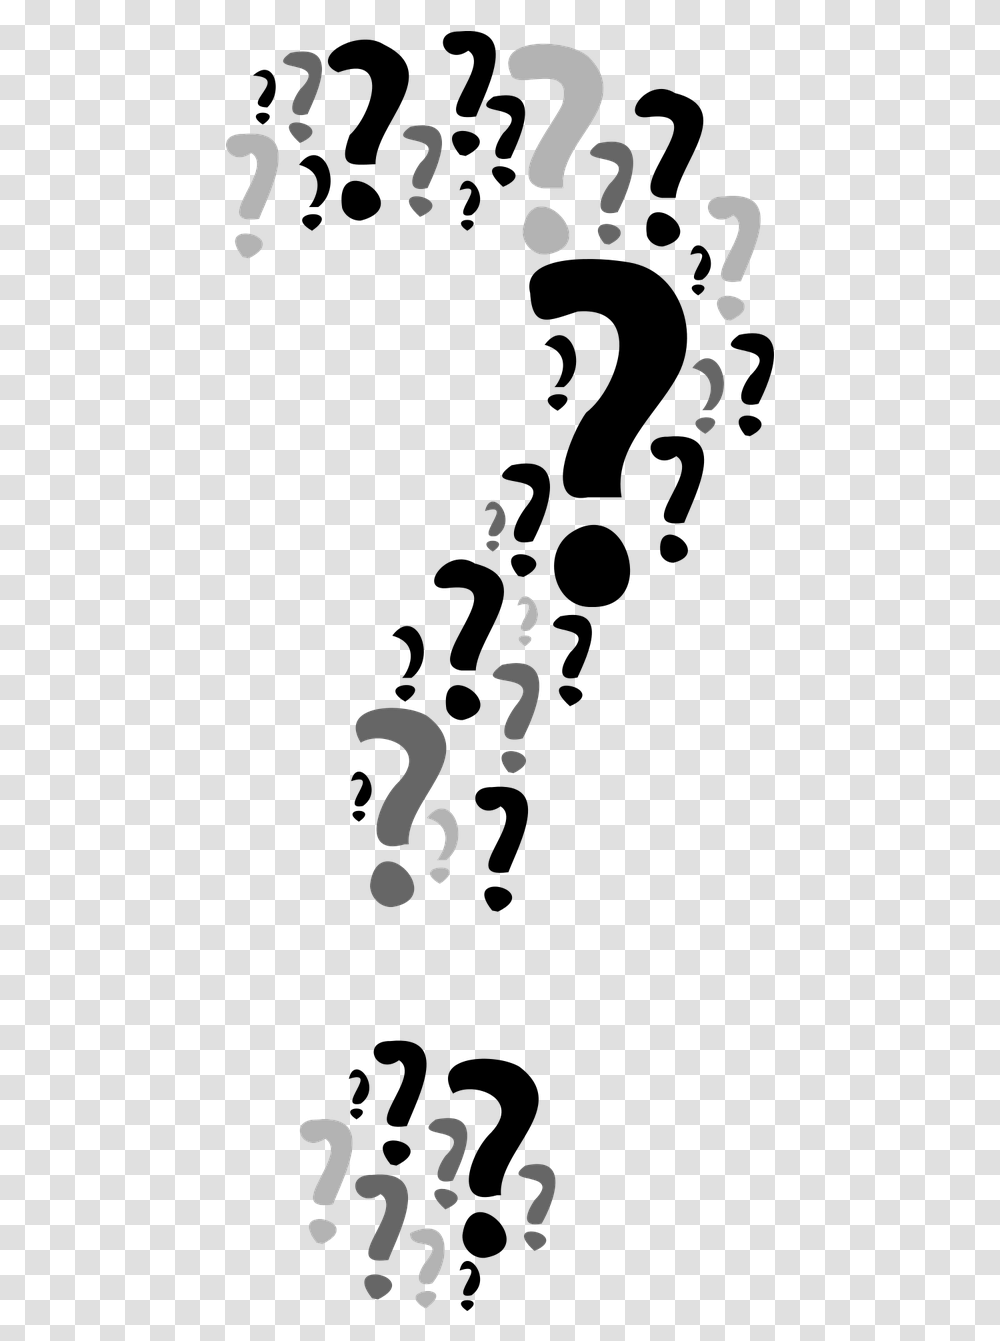 Question Questions The Question Mark Free Picture Making Right Choices, Number, Alphabet Transparent Png